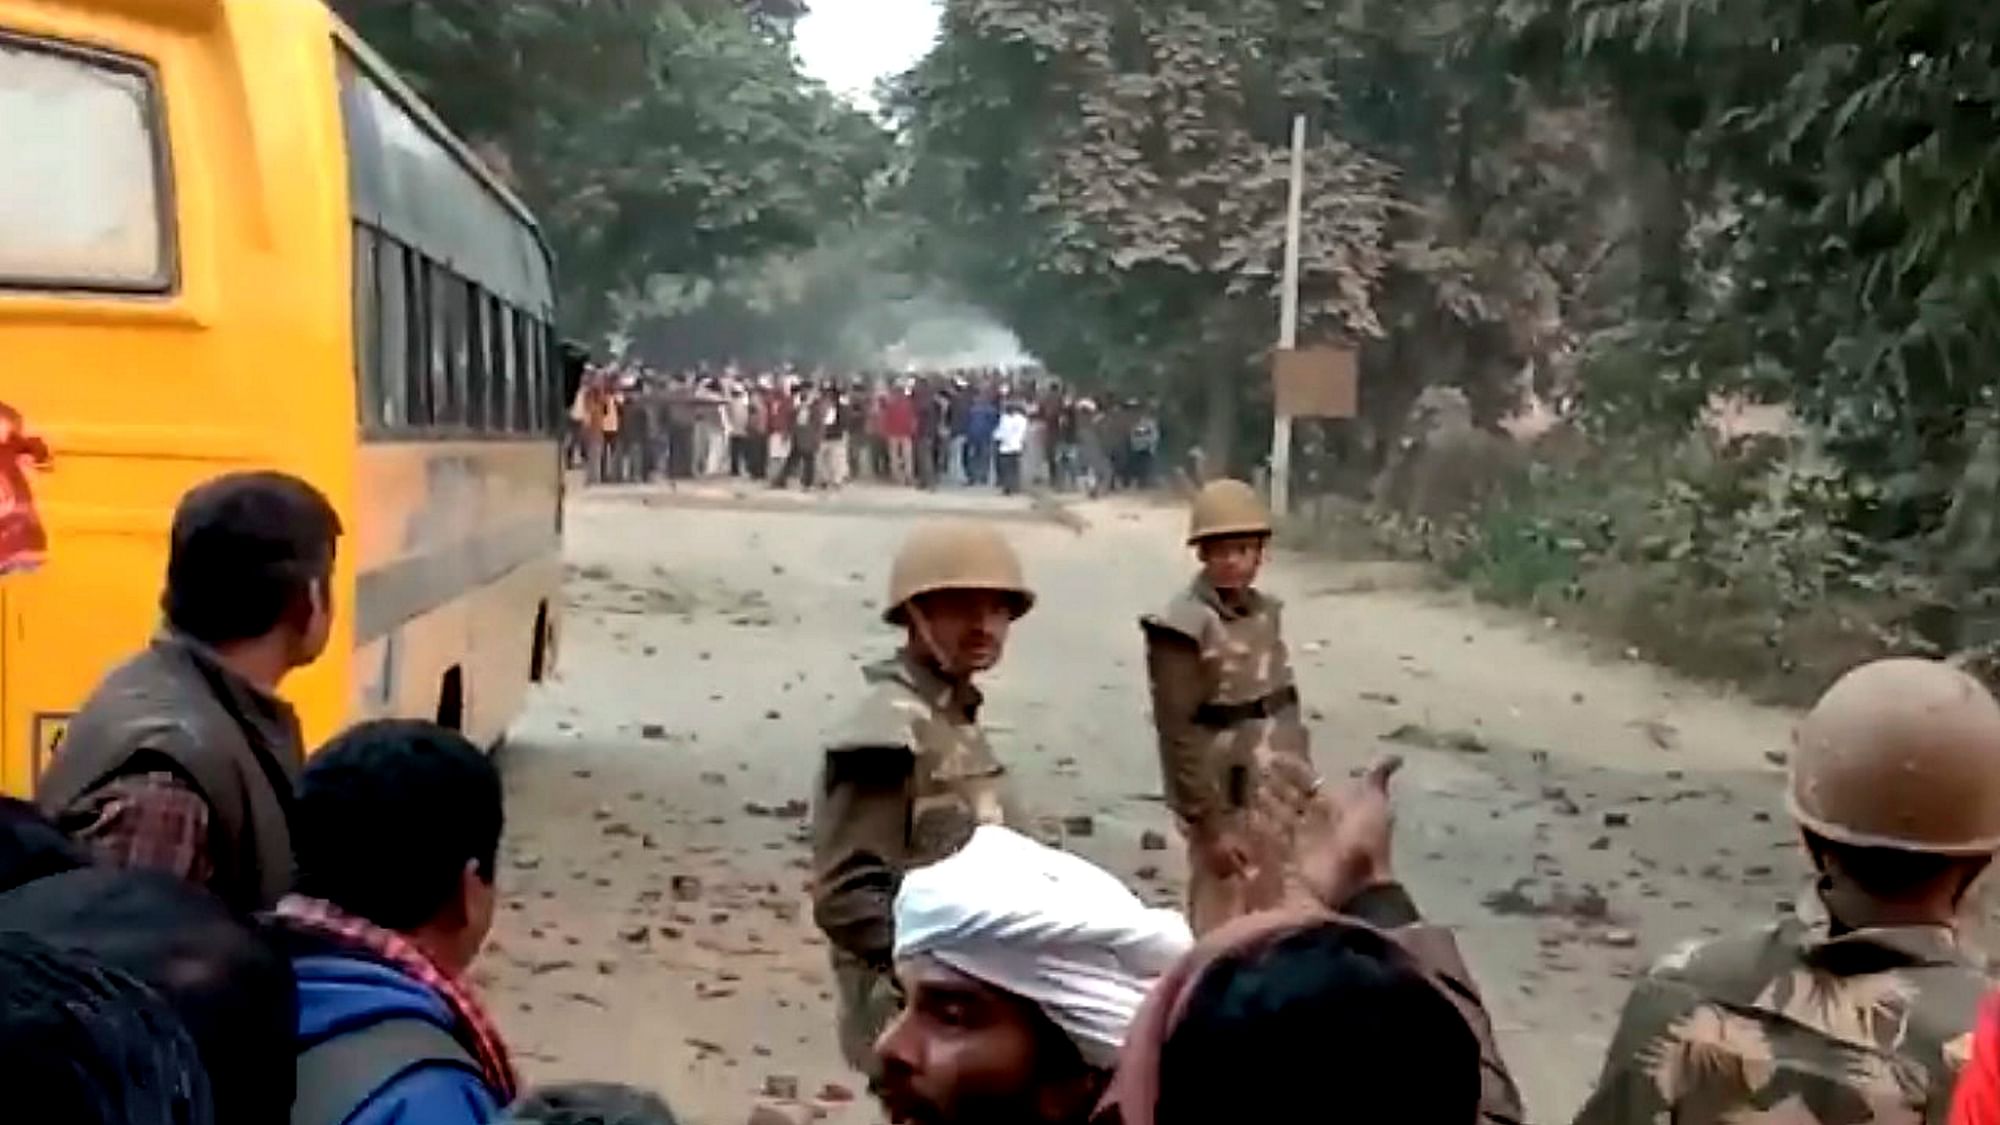 A protesting mob resorted to violence in Uttar Pradesh’s Ghazipur area.